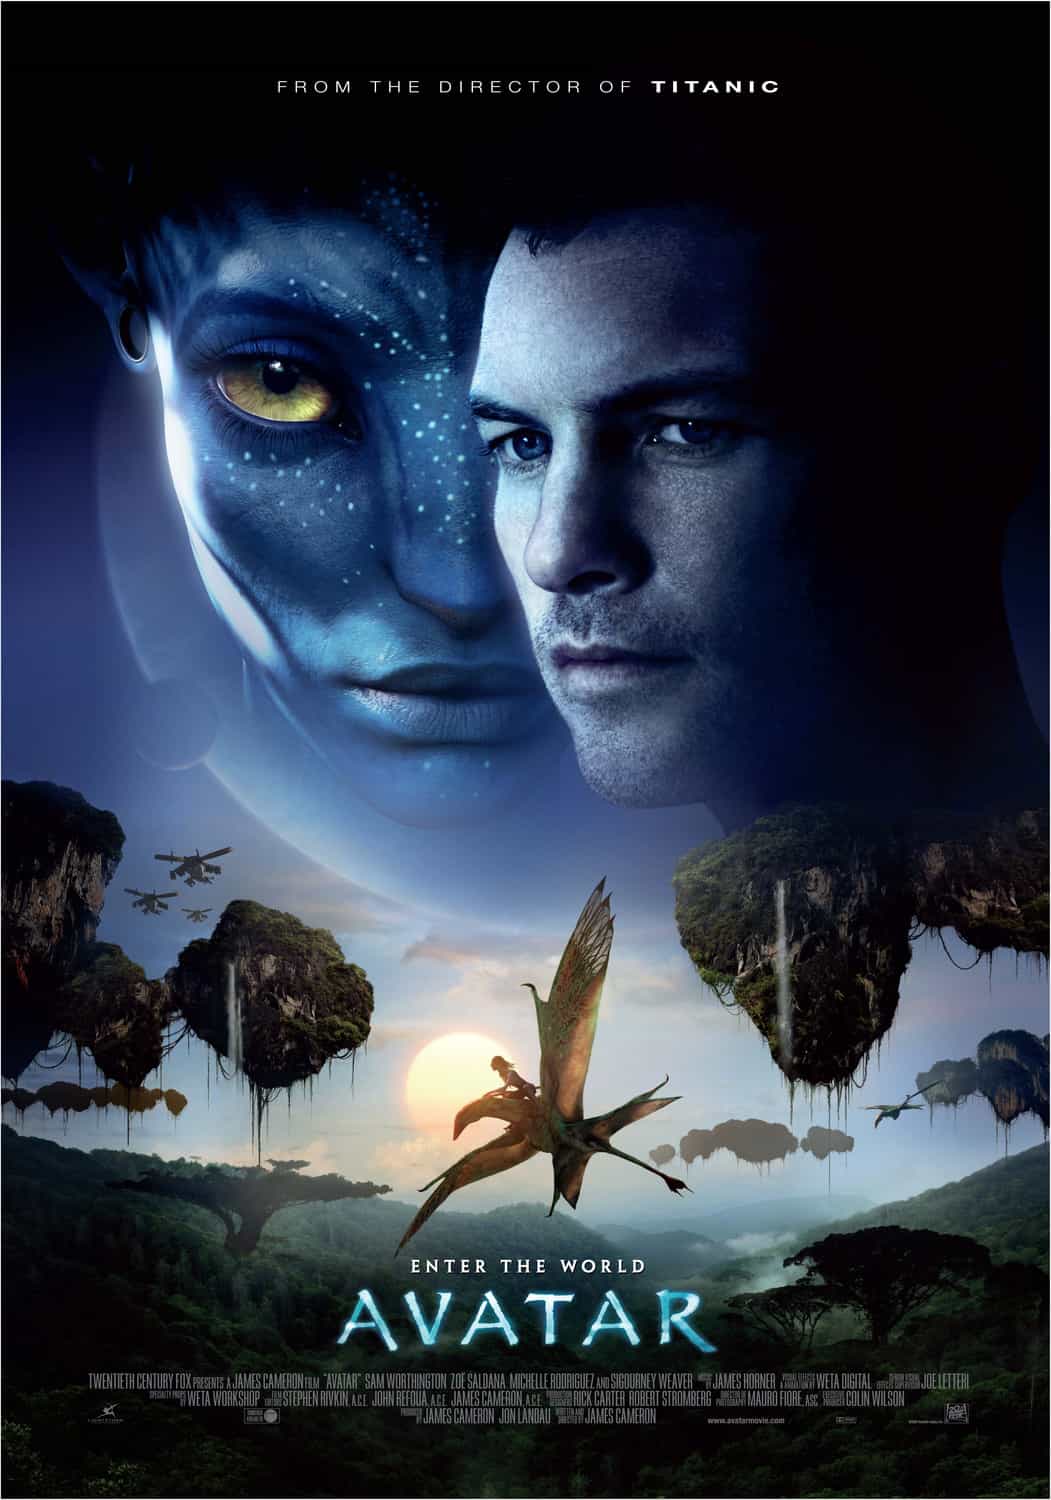 Avatar is once again the top grossing movie of all time globally after a re-release in China